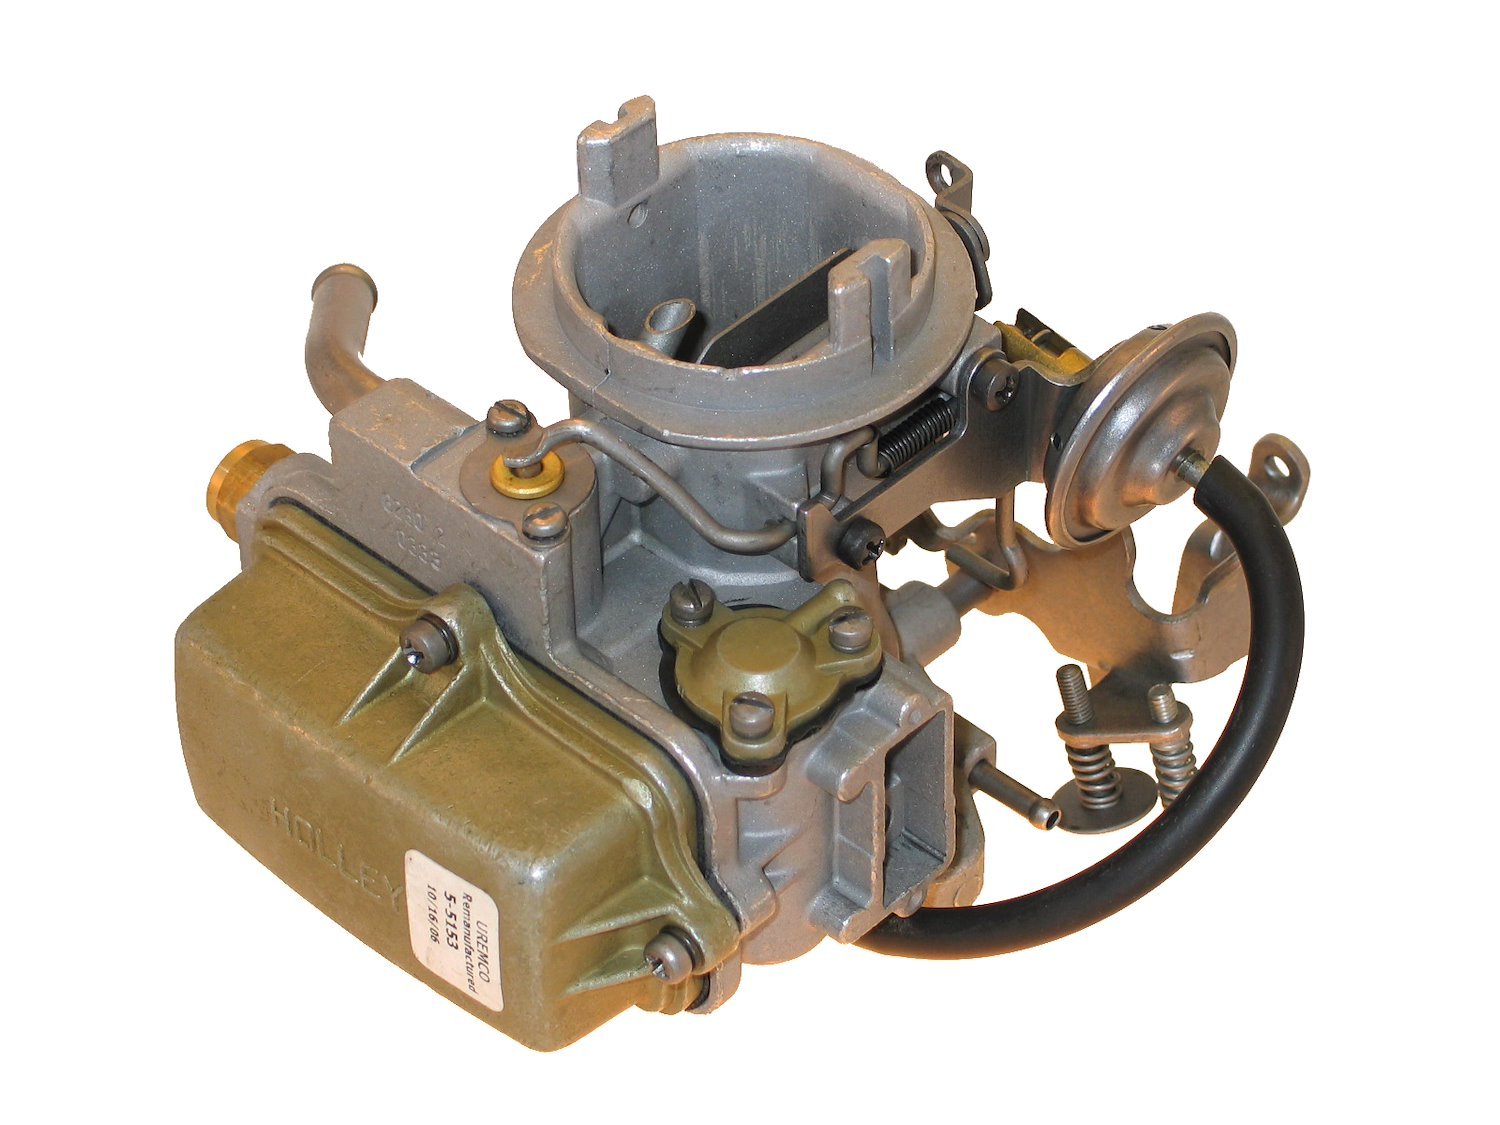 7-781 Holley Remanufactured Carburetor, 1920-Style